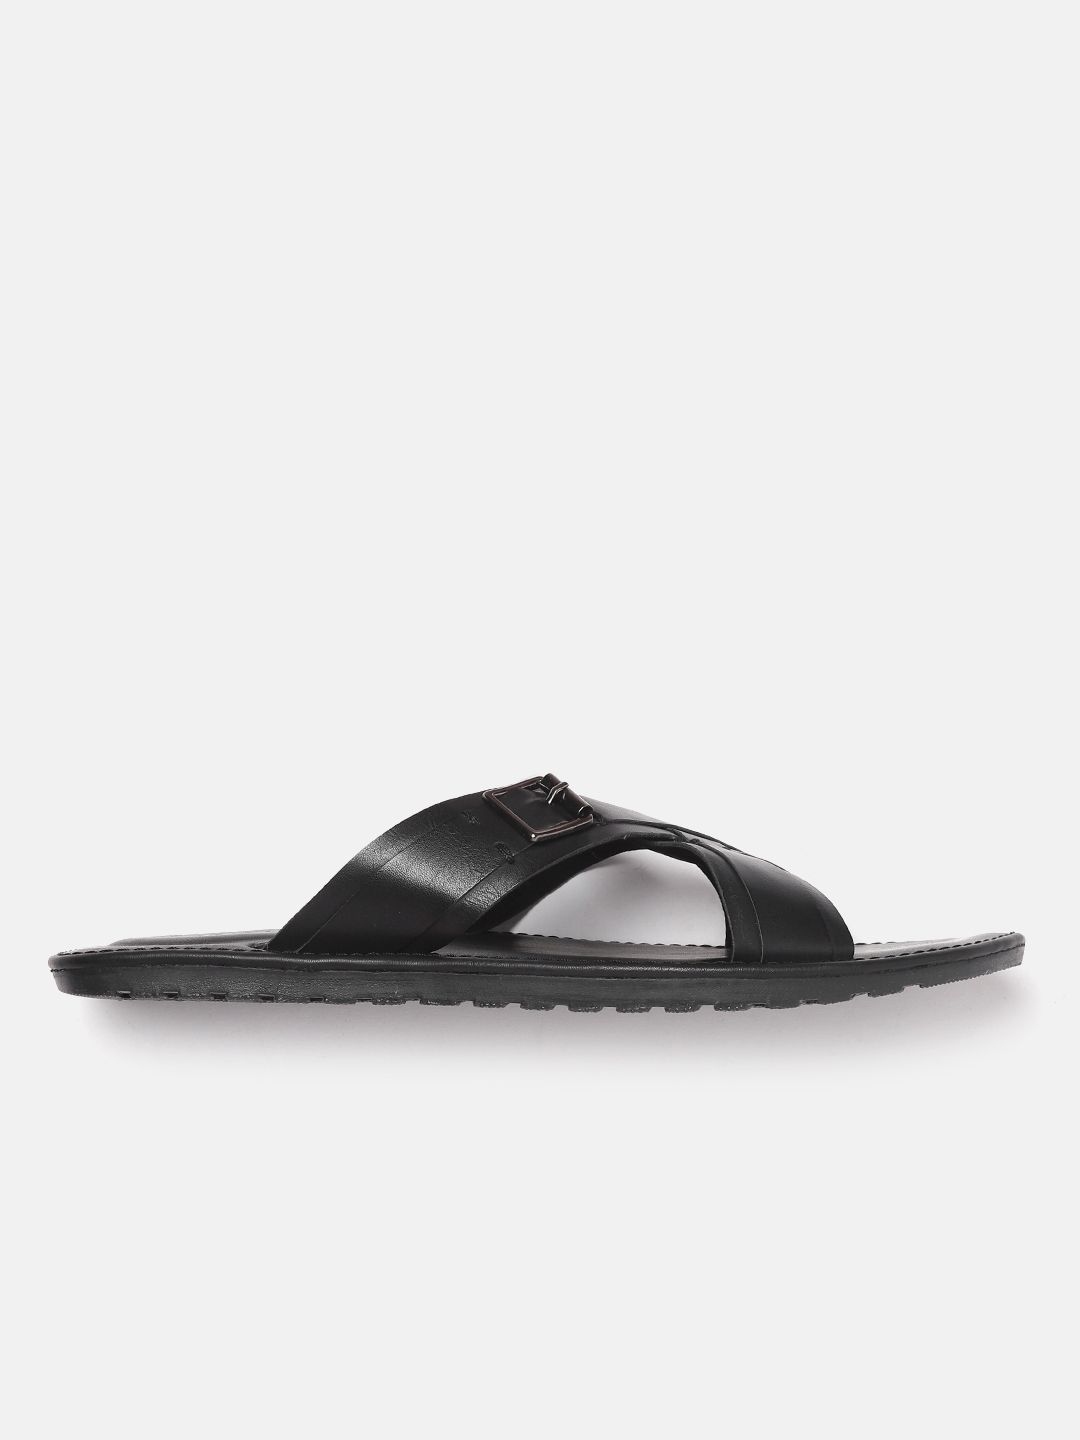 mast and harbour sandals mens